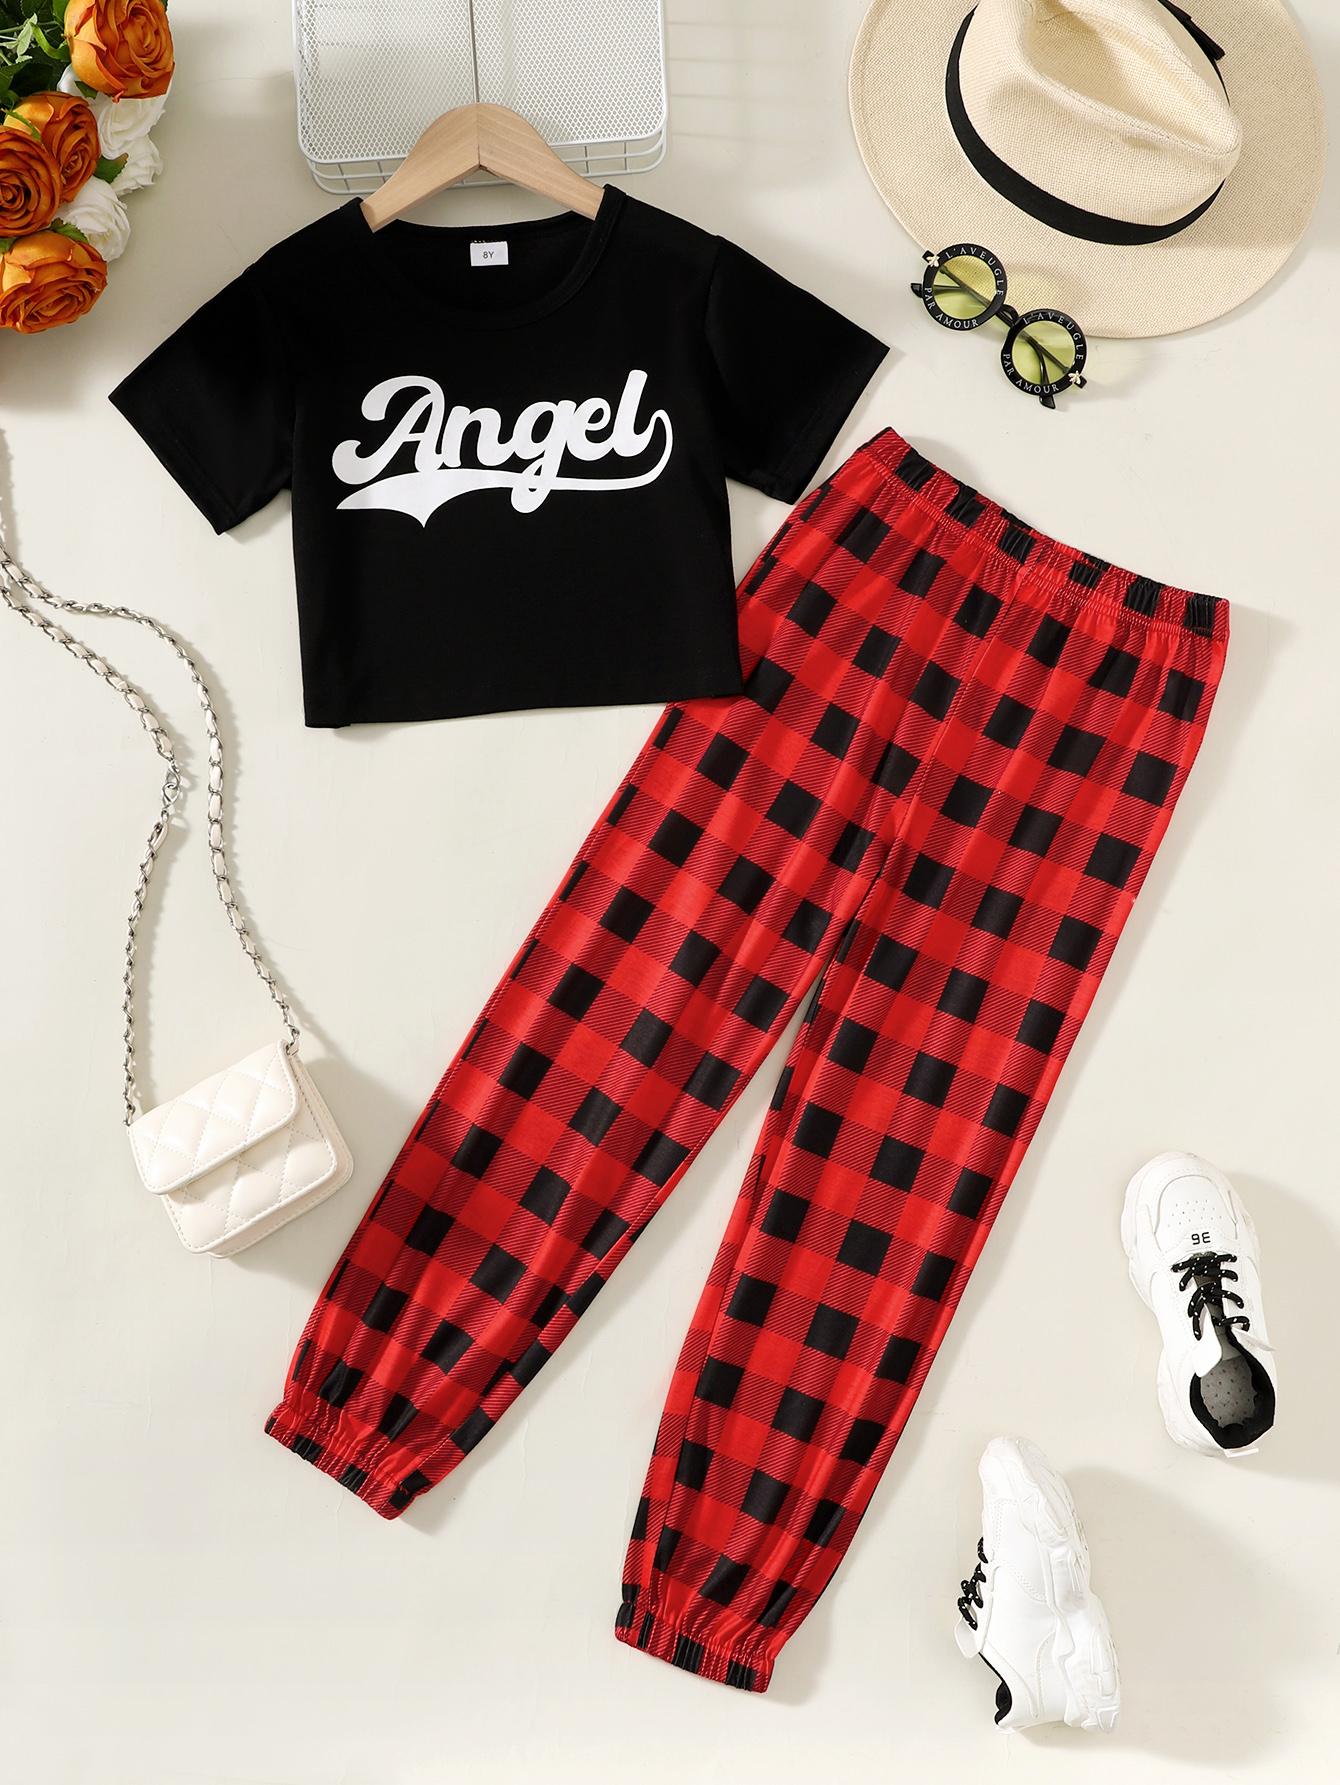 7-14Y Ready Stock Kid Girls Pants Sets "Angel" Letter Print Short Sleeve T-shirt Elastic Plaid Trousers 2Pcs Spring Fall Clothing From 7Y-14Y Red Catpapa 462312012